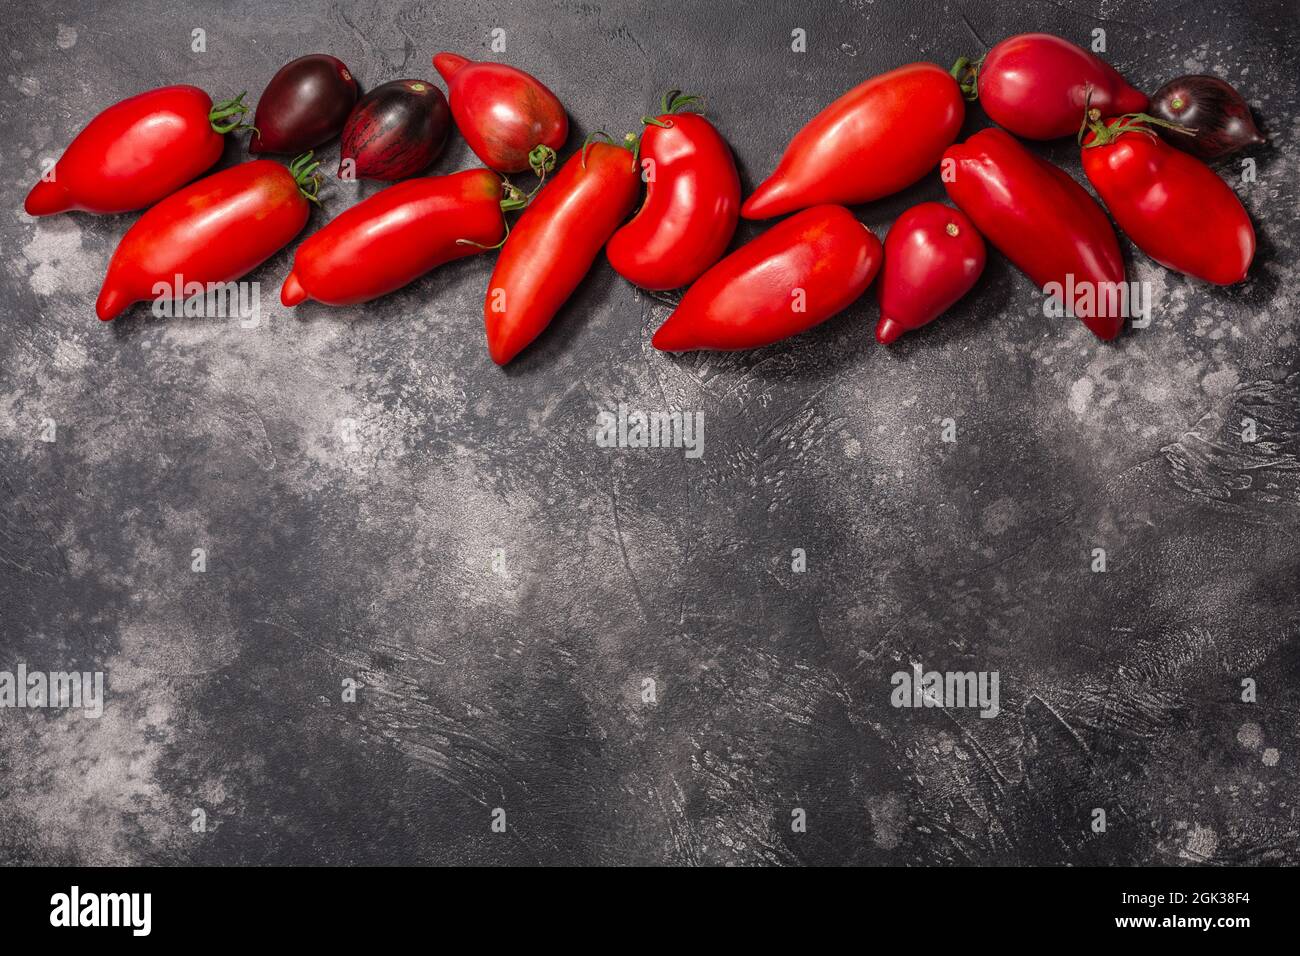 Ripe pepperlike heirloom tomatoes atop dark textured backdrop, copy spce, top view (Solanum lycopersicum fruits) Stock Photo